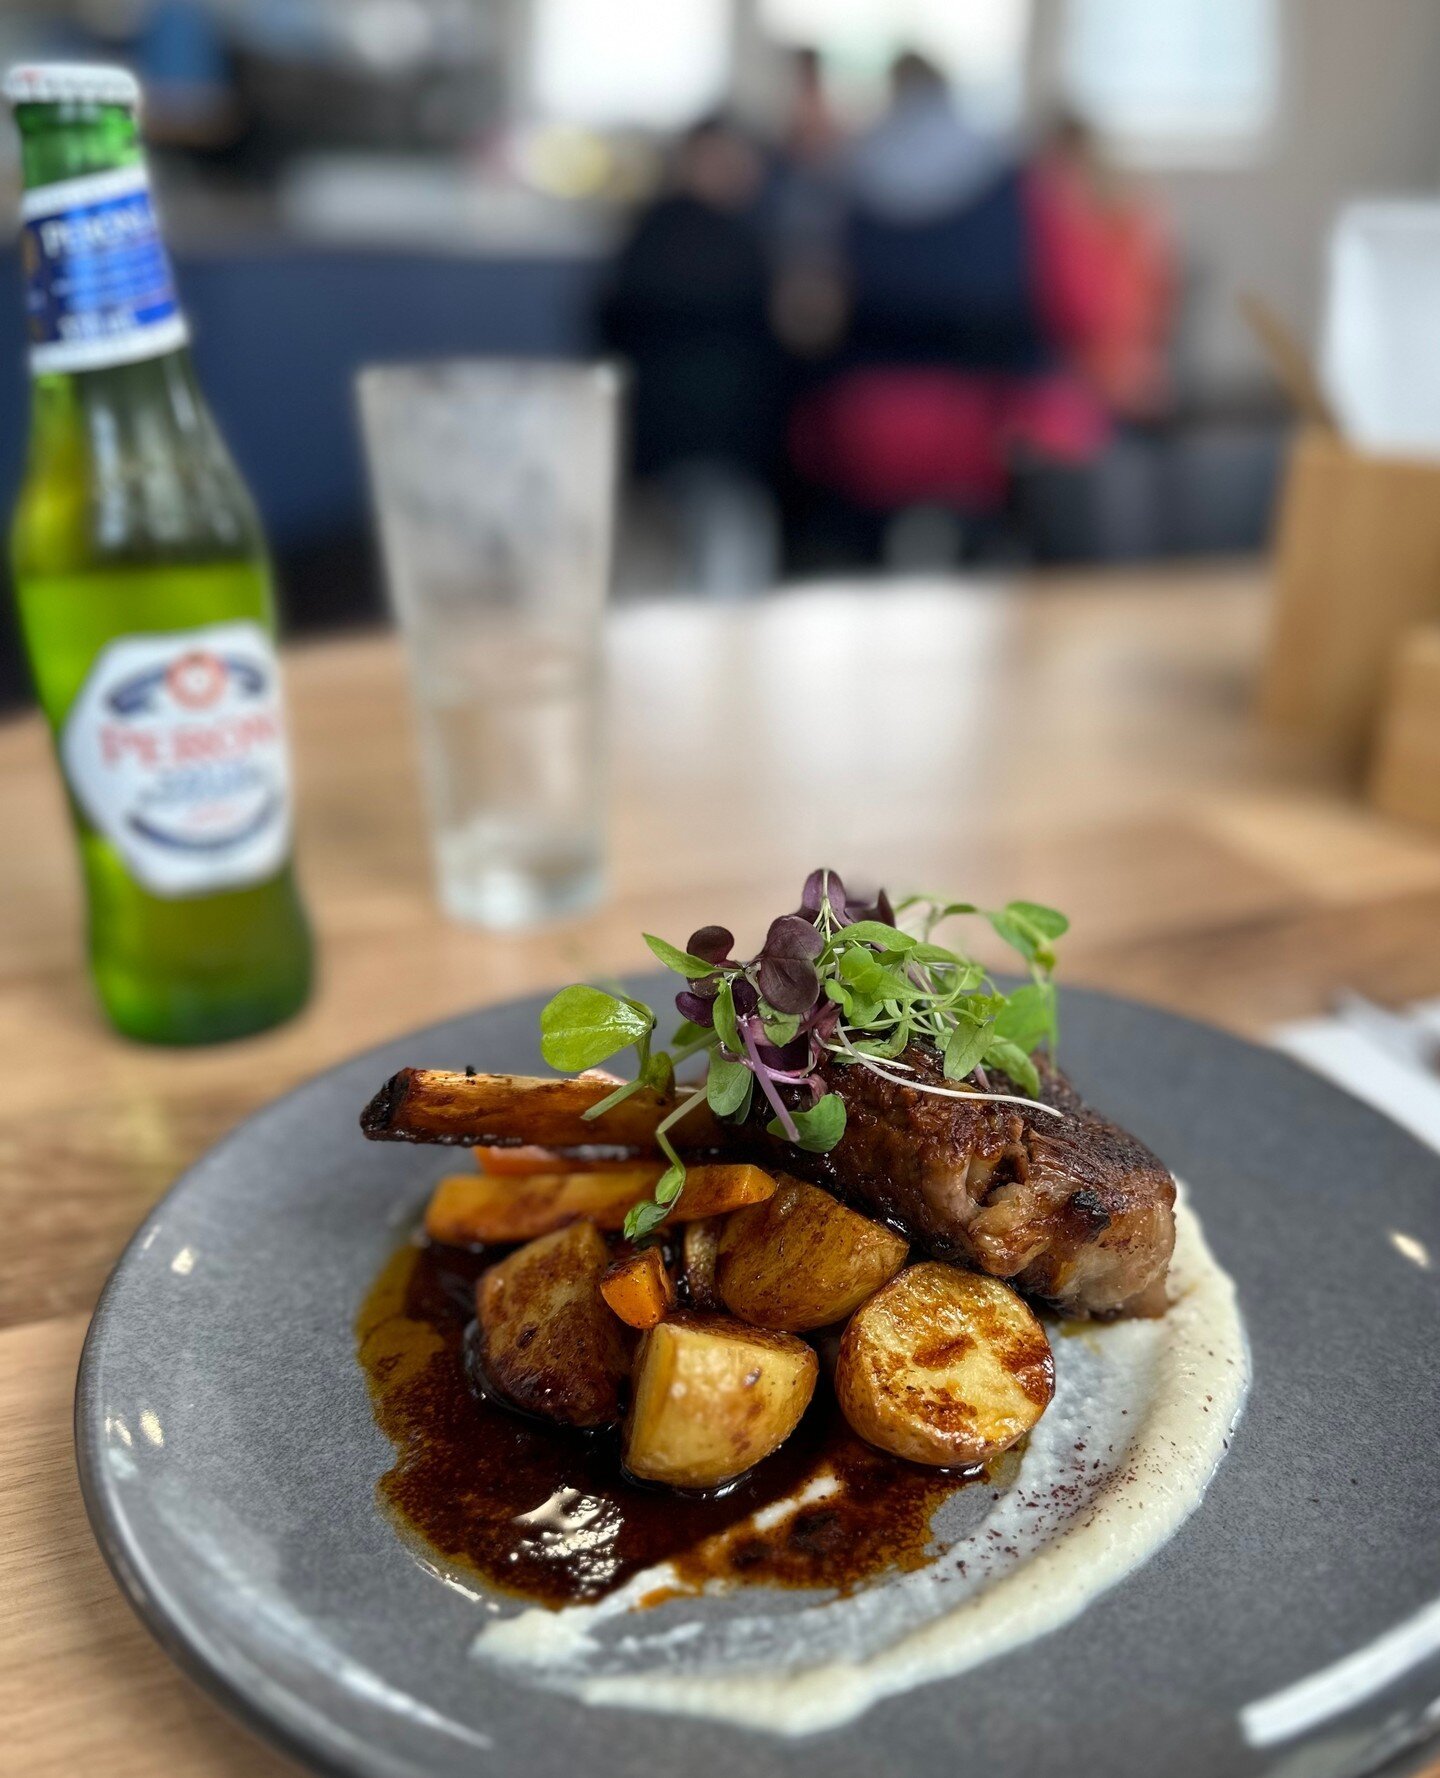 ✨ WEEKEND SPECIAL! ✨ Braised Rib Eye served with Roasted Chat Potatoes, Butter Basted Dutch Carrots, Cauliflower Puree &amp; Red Wine Jus!⁠
⁠
⁠
⁠
⁠
#extractedivanhoe #coffee #ivanhoecafe #dineinivanhoe #melbournecafe #hungry #delicious​#breakfast #he